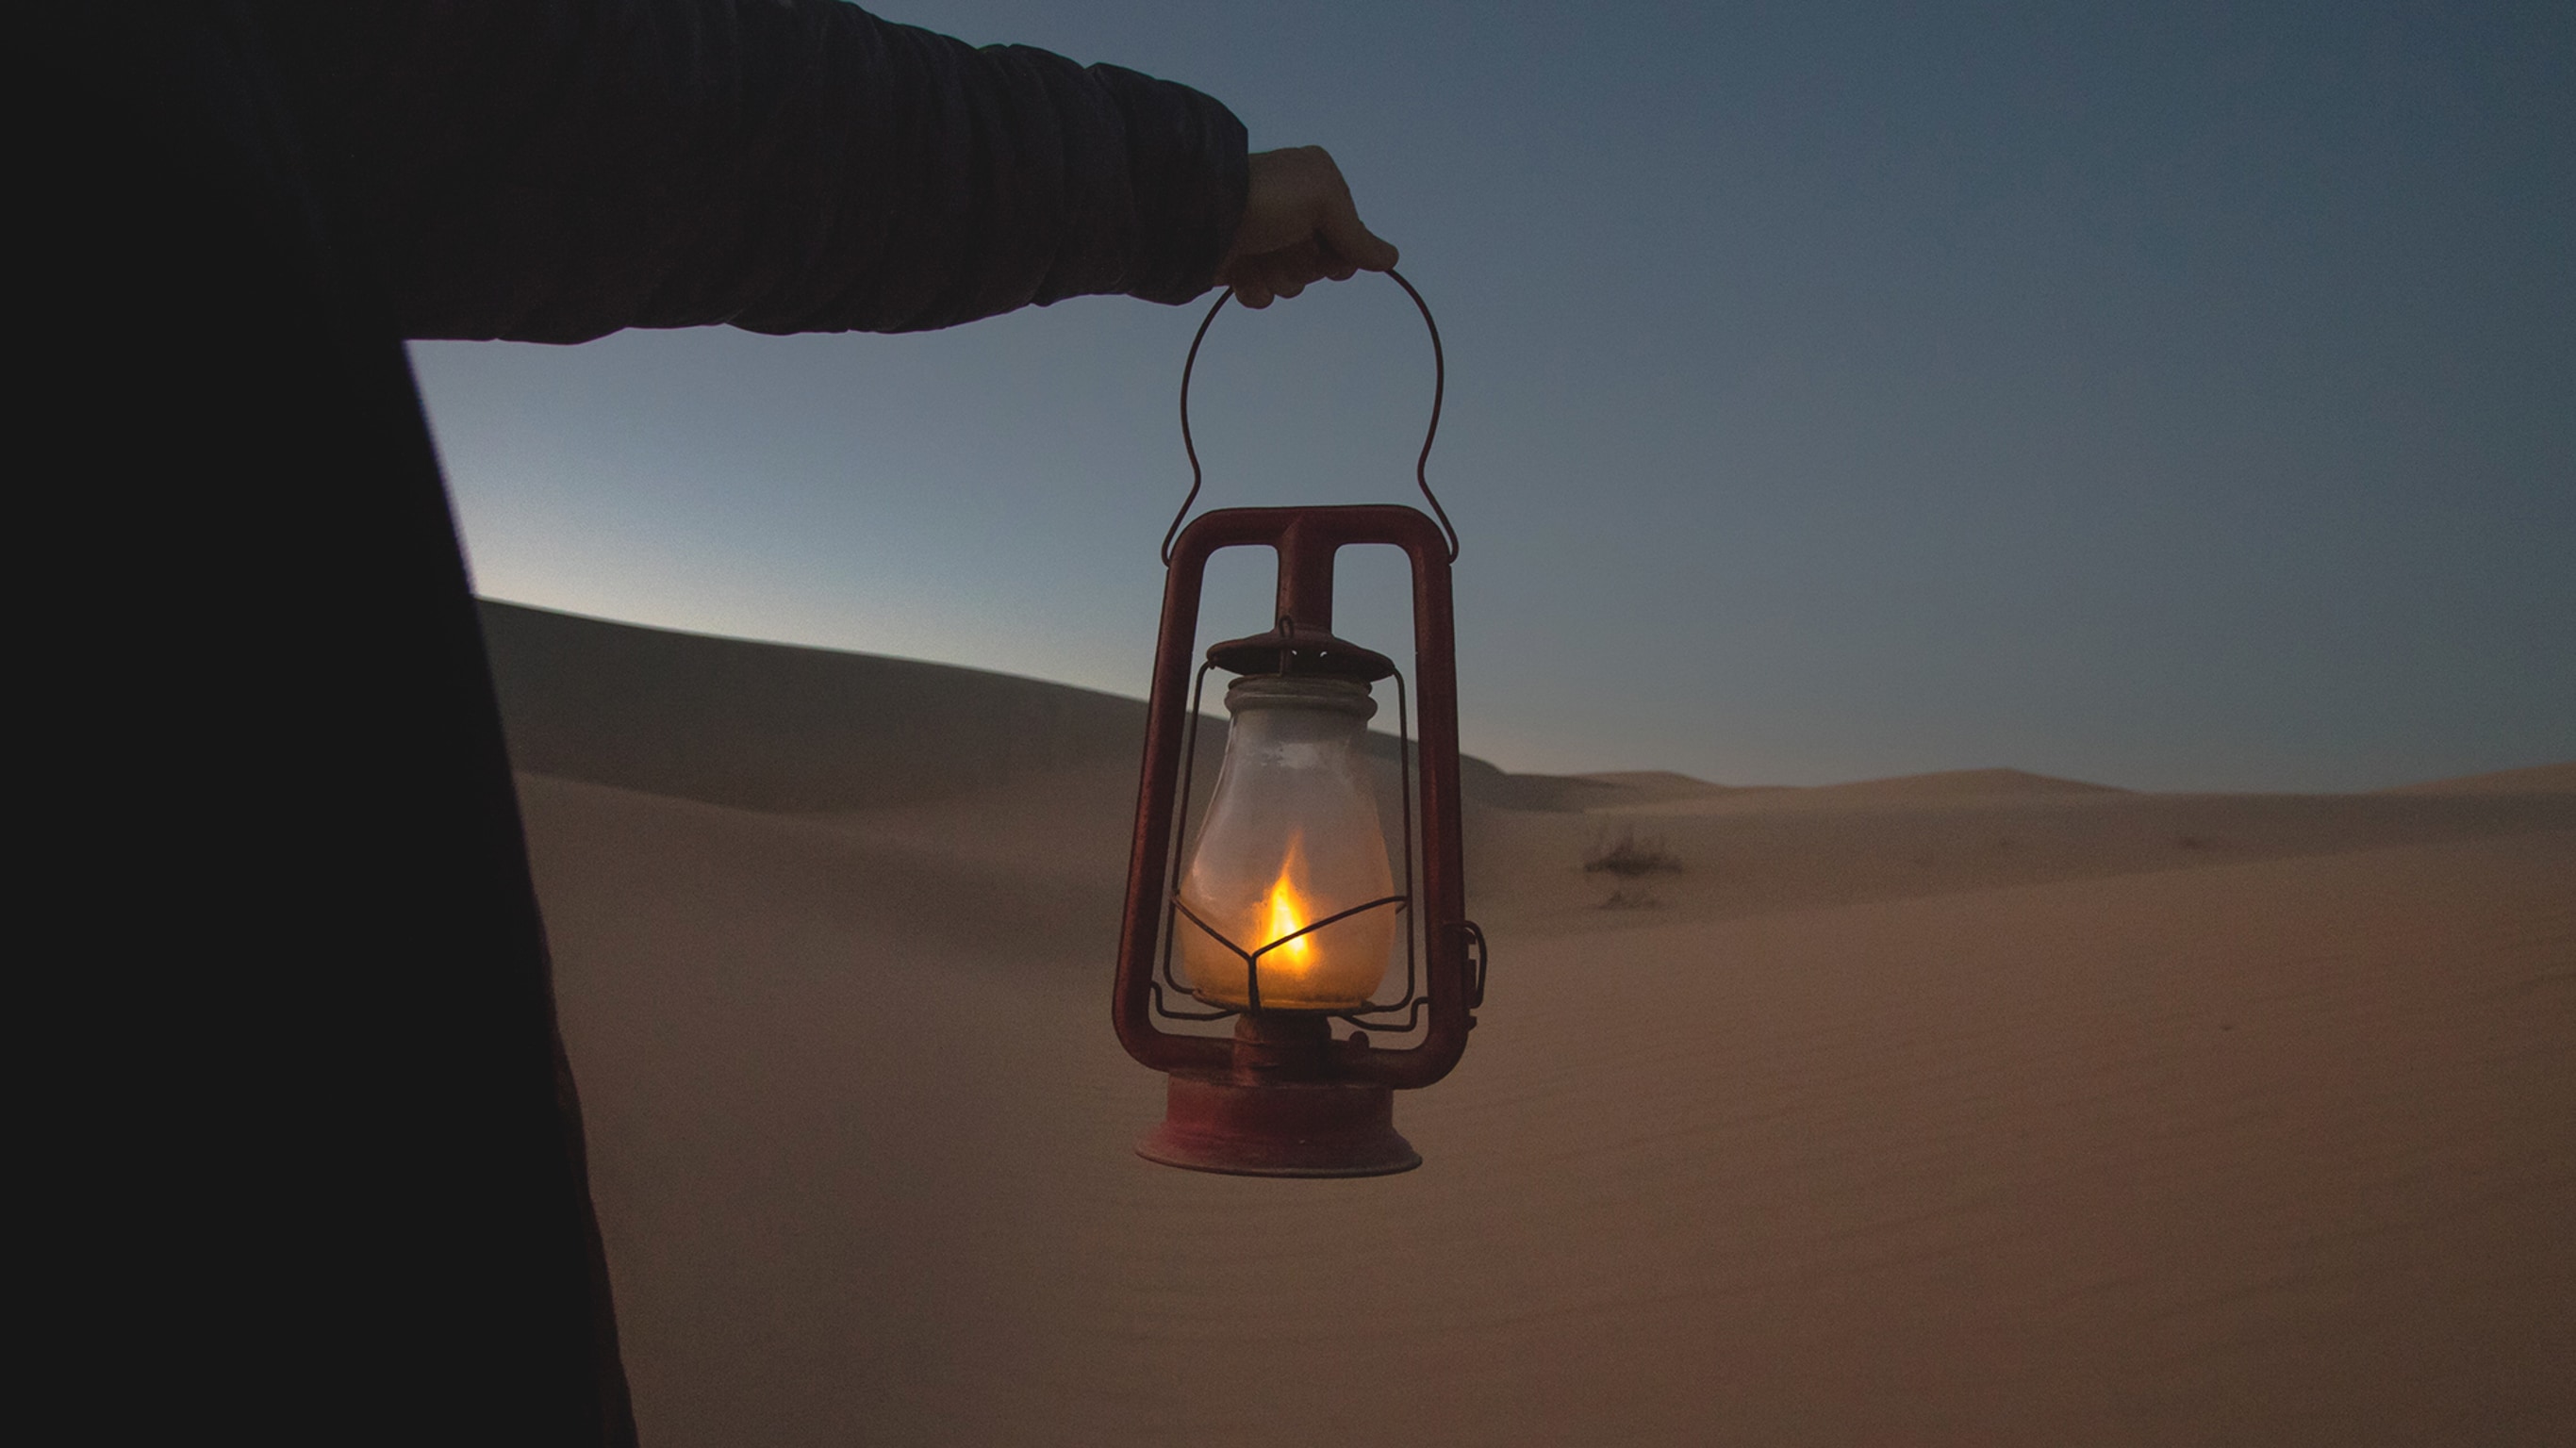 An unseen person holds a gas lantern in a sandy location.